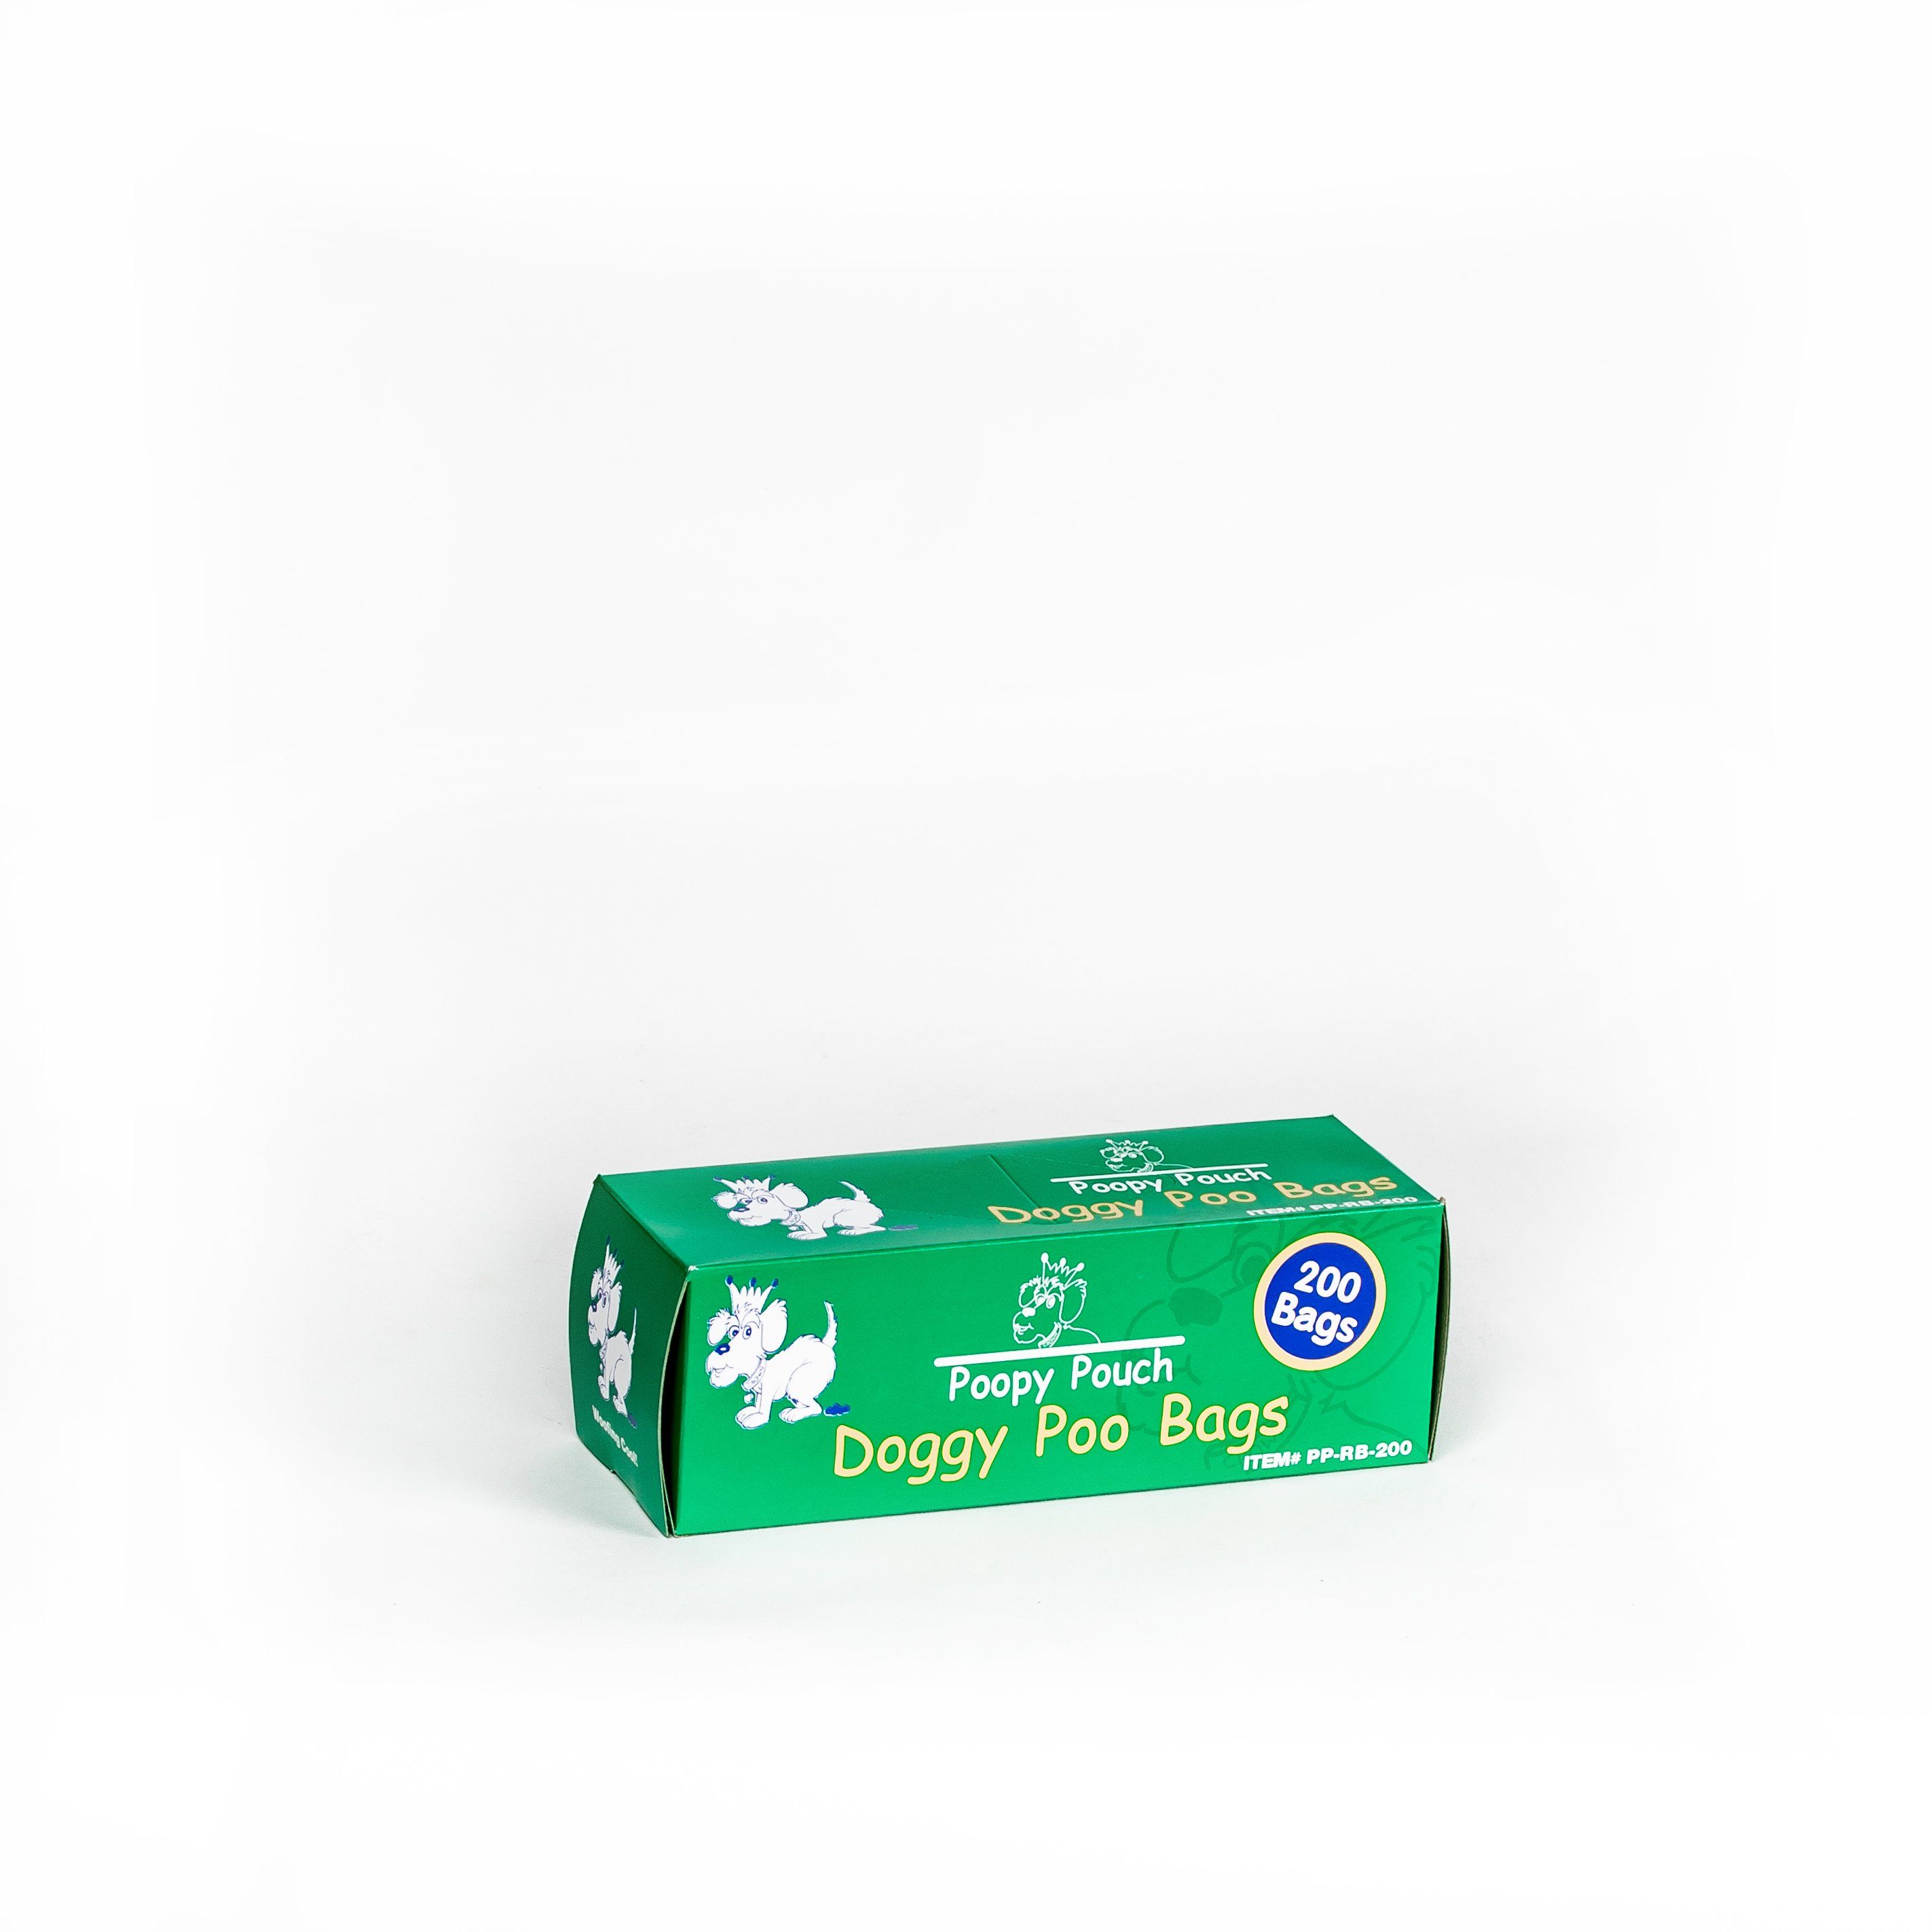 Poopy Pouch Universal Pet Waste Bags